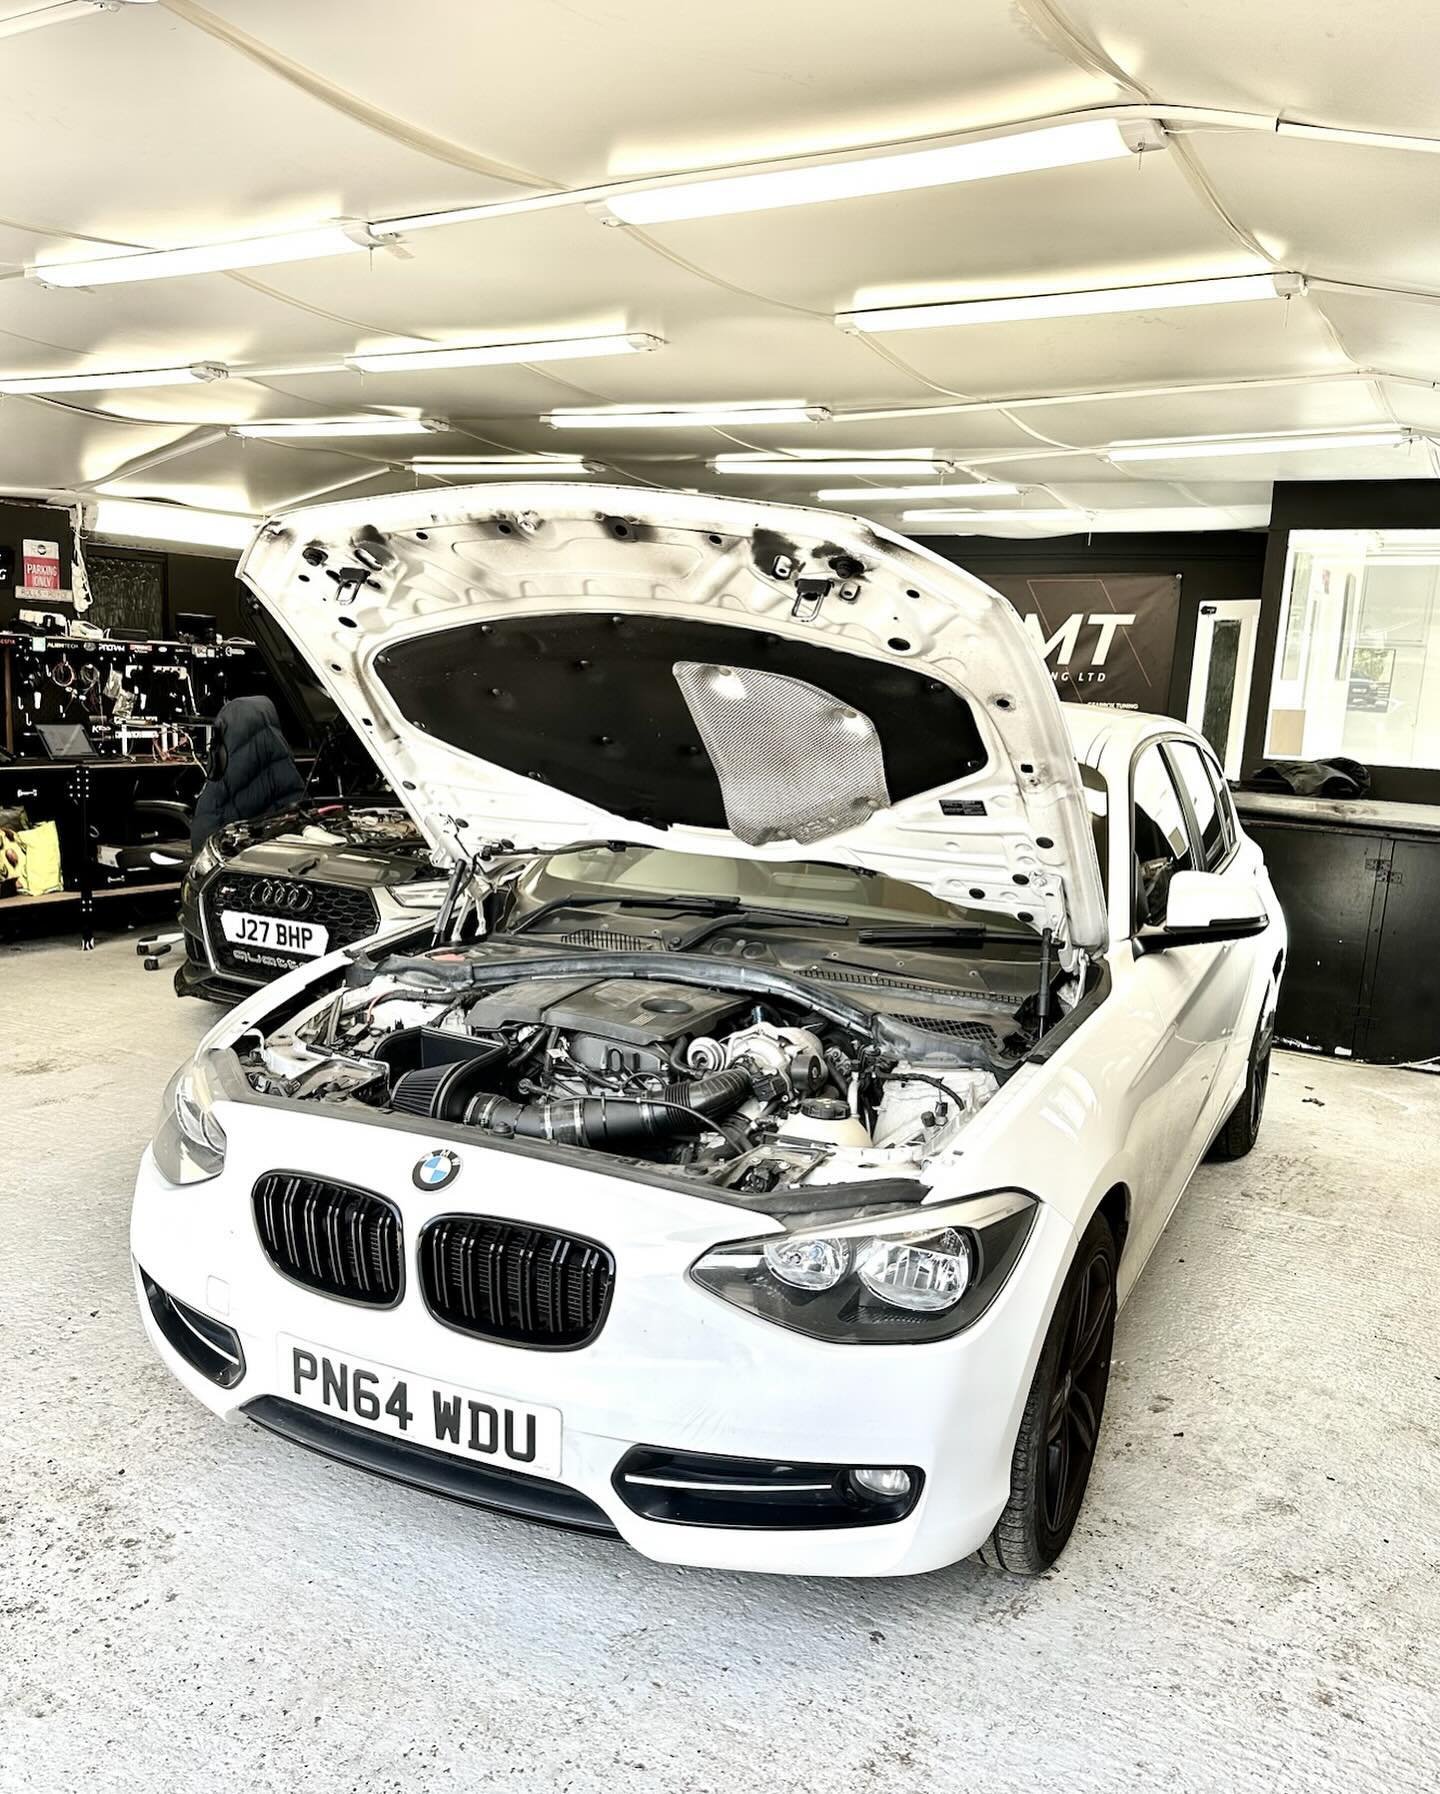 Incredible BMW 116 in the workshop for a Stage 1 Performance tune 🔥

Own a BMW and looking for more power? Get in contact to find out what we can do for you ☑️

➖➖➖➖➖➖➖➖➖➖➖➖➖

📱01707502665
📧 info@mac-tuning.co.uk
💻 www.mac-tuning.co.uk
📈 4 &amp;